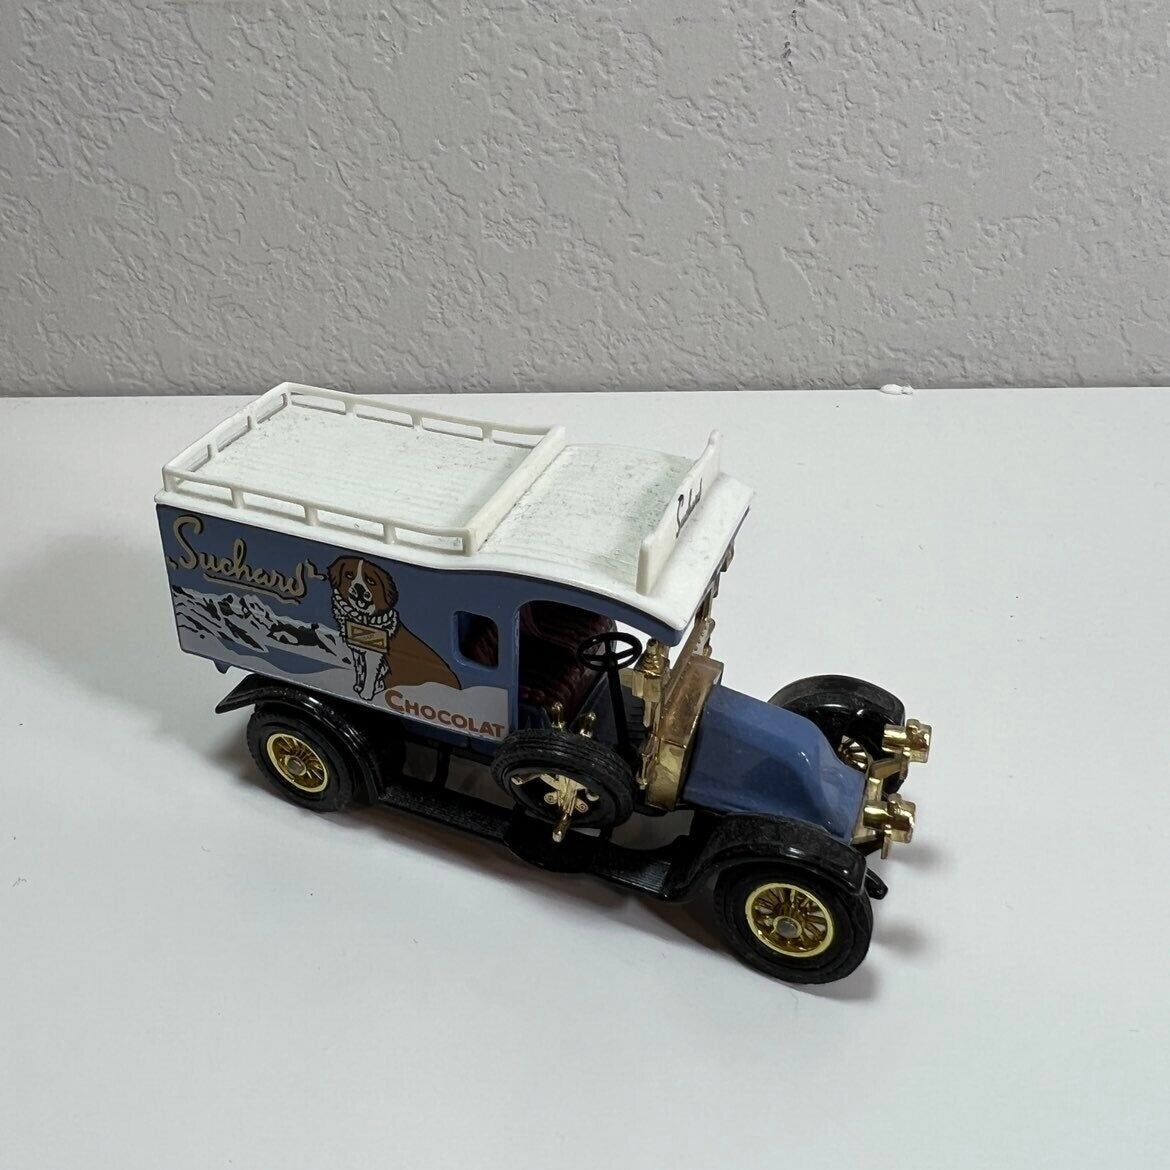 Matchbox Die-cast Truck Y-25 1910 Renault Type Ag Models Of Yesteryear Toy Car